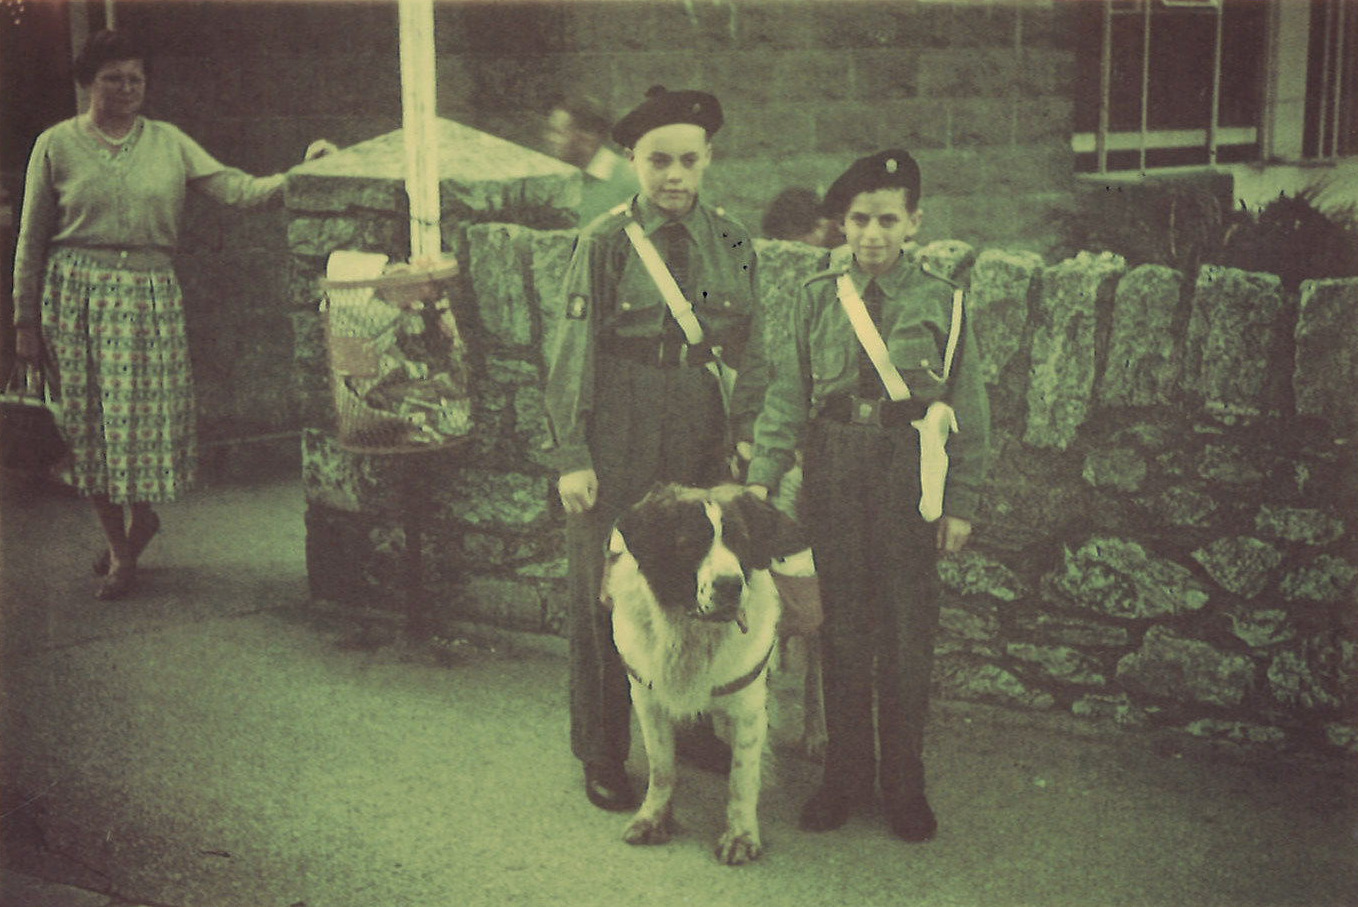 An early colour photograph showing two Cadets with a large dog between them